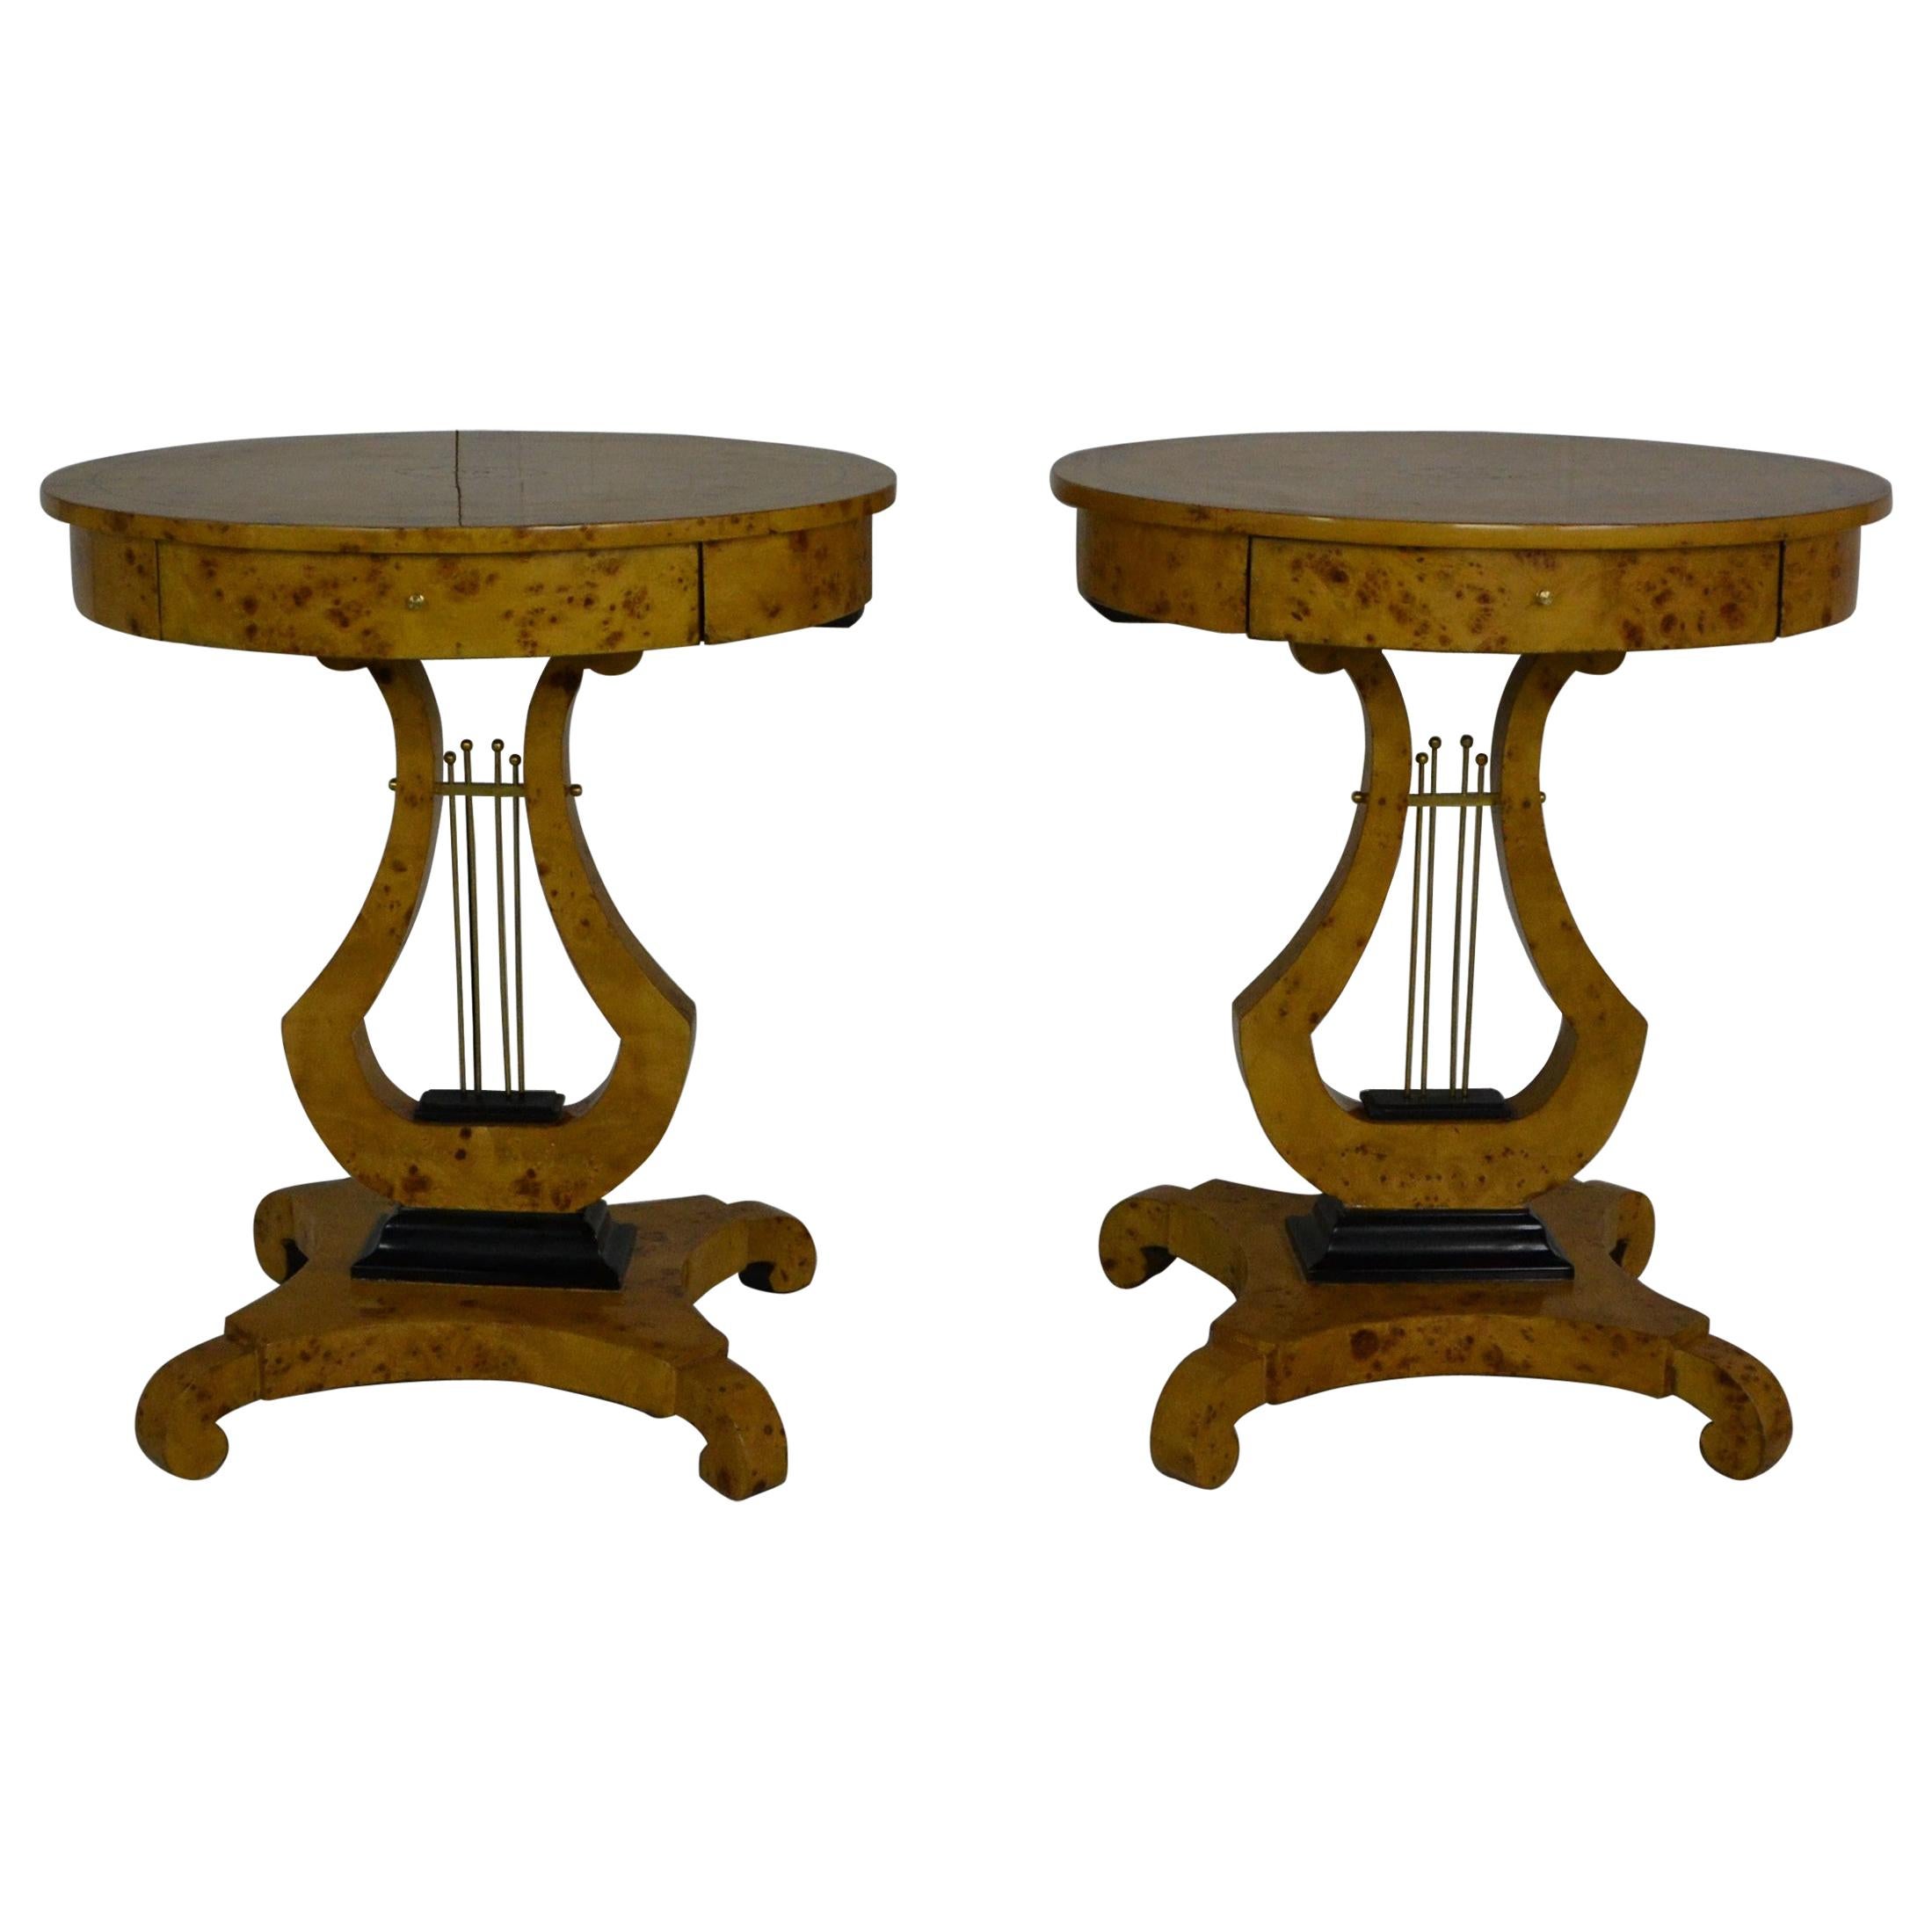 Pair of Empire Style Side Tables / Nightstands